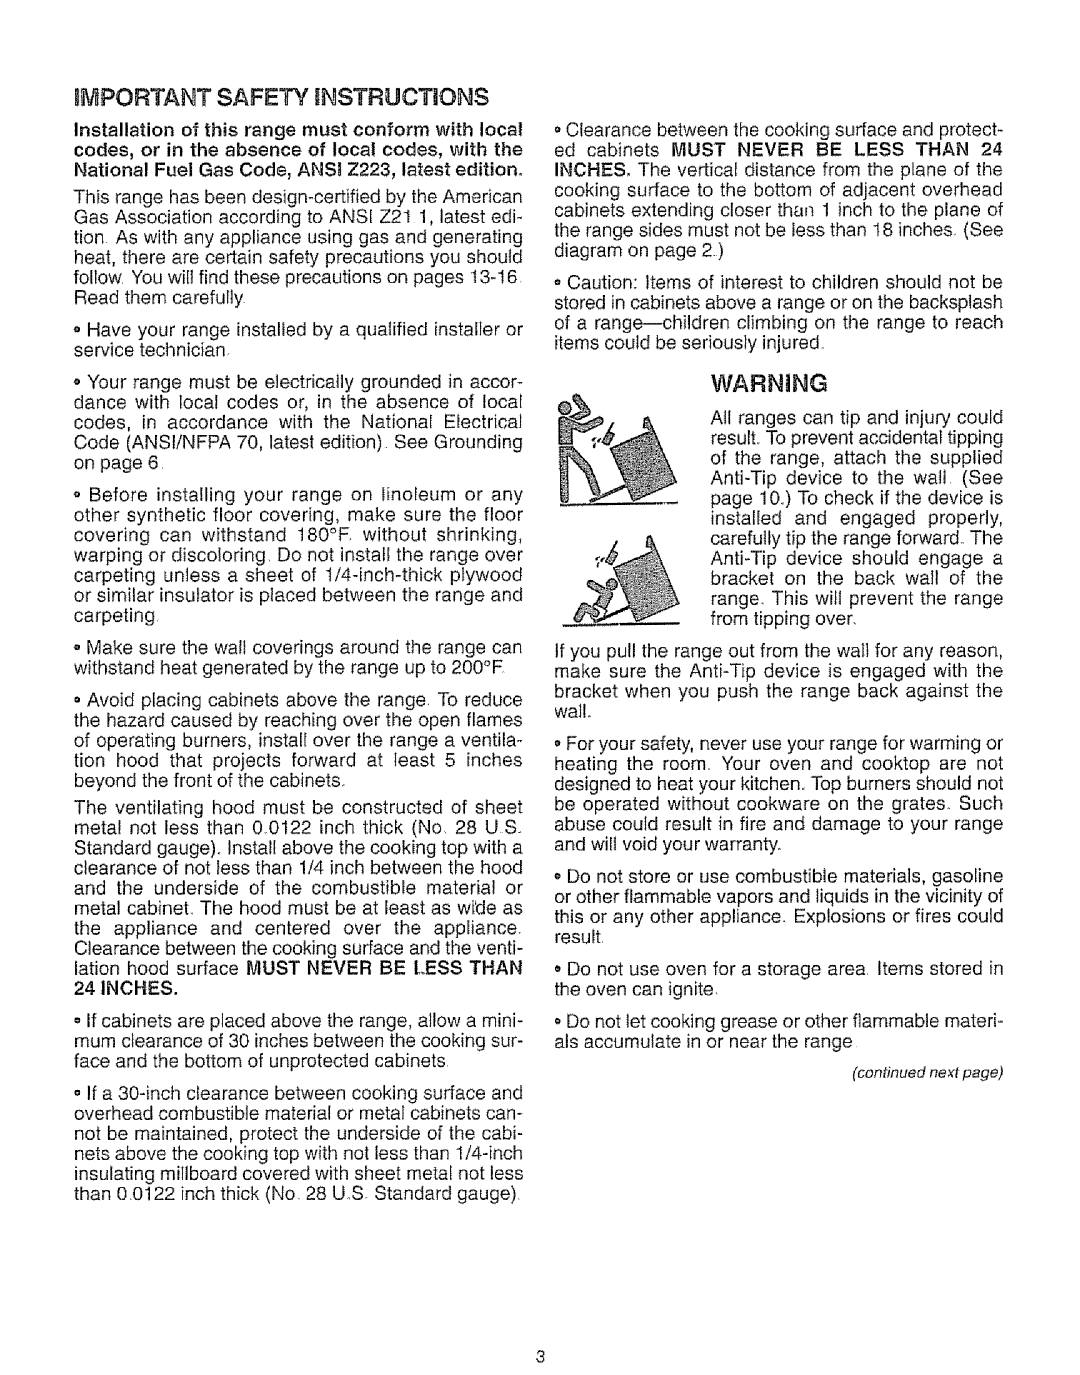 Kenmore 73819, 73511, 73515, 73811 manual IMPORTANT SAFETY nNSTRUCT ONS, continued next page 